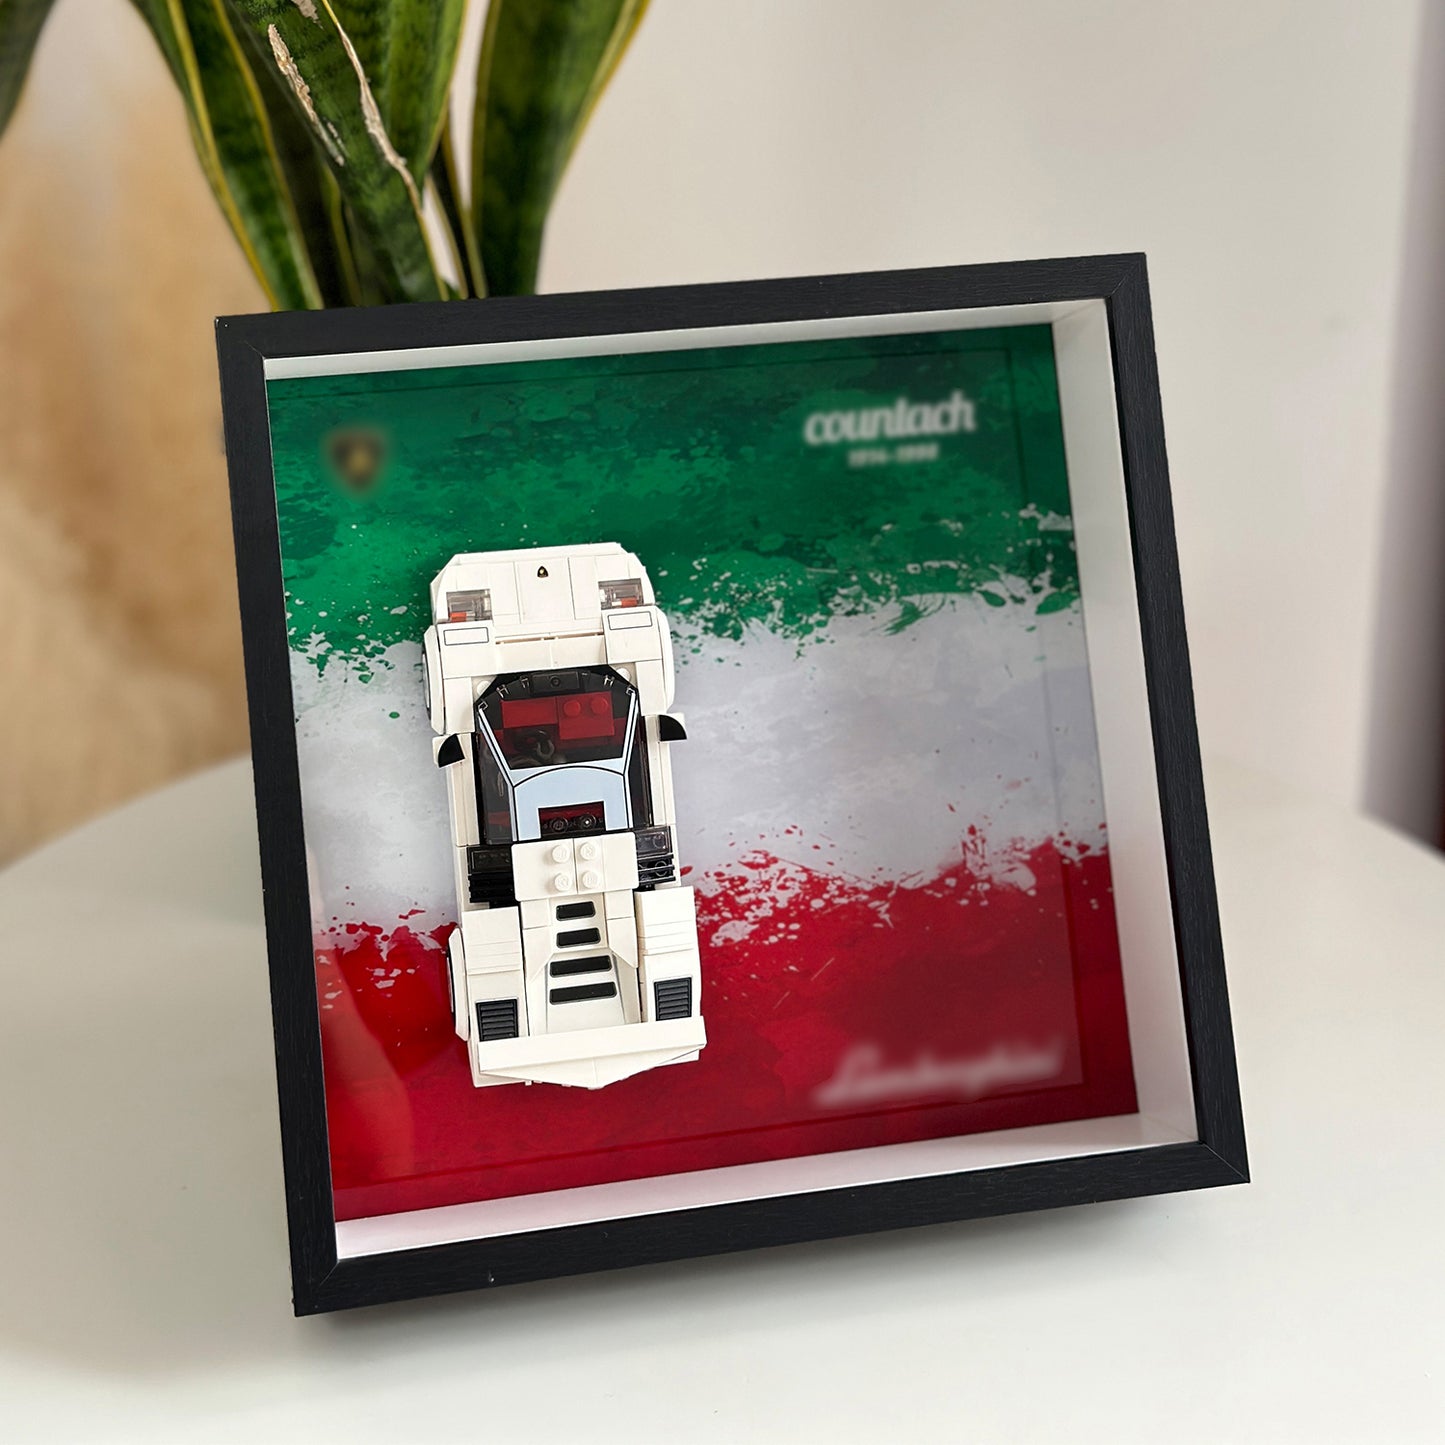 iLuane Display Wallboard for Lego Speed Champions Lamborghini Countach 76908 Race Car Toy, Adult Collectibles Lego Car Wall Mount, Gifts for Lego Lovers (Only Display Wallboard)